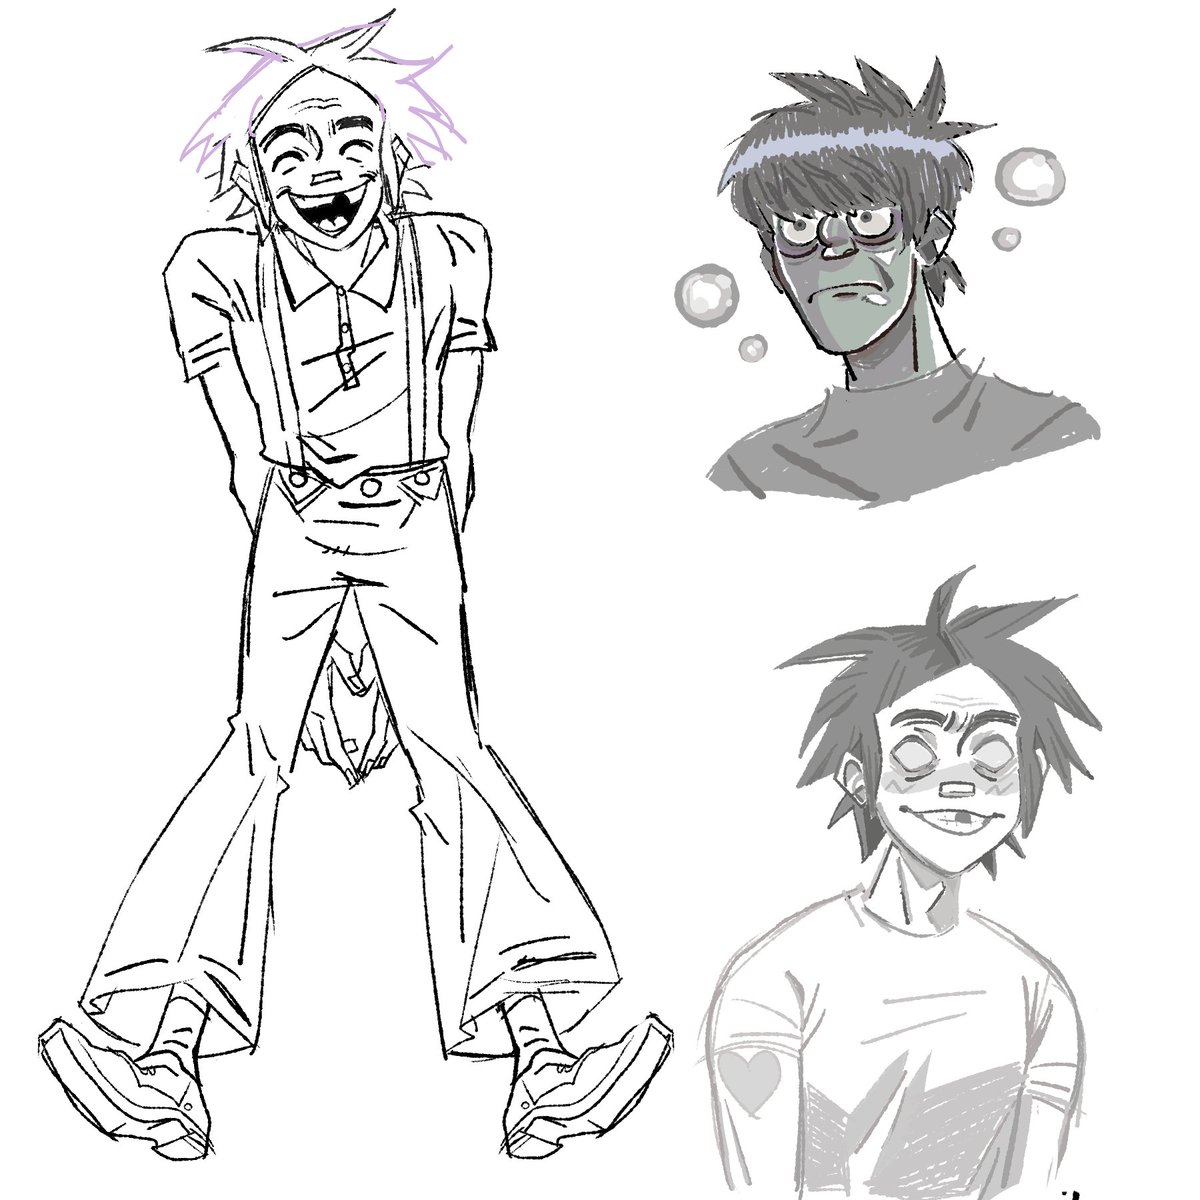 sketch dump. might finish some of them idk. my brain is so scattered. this is all i can offer u___u ( gorillaz ) 